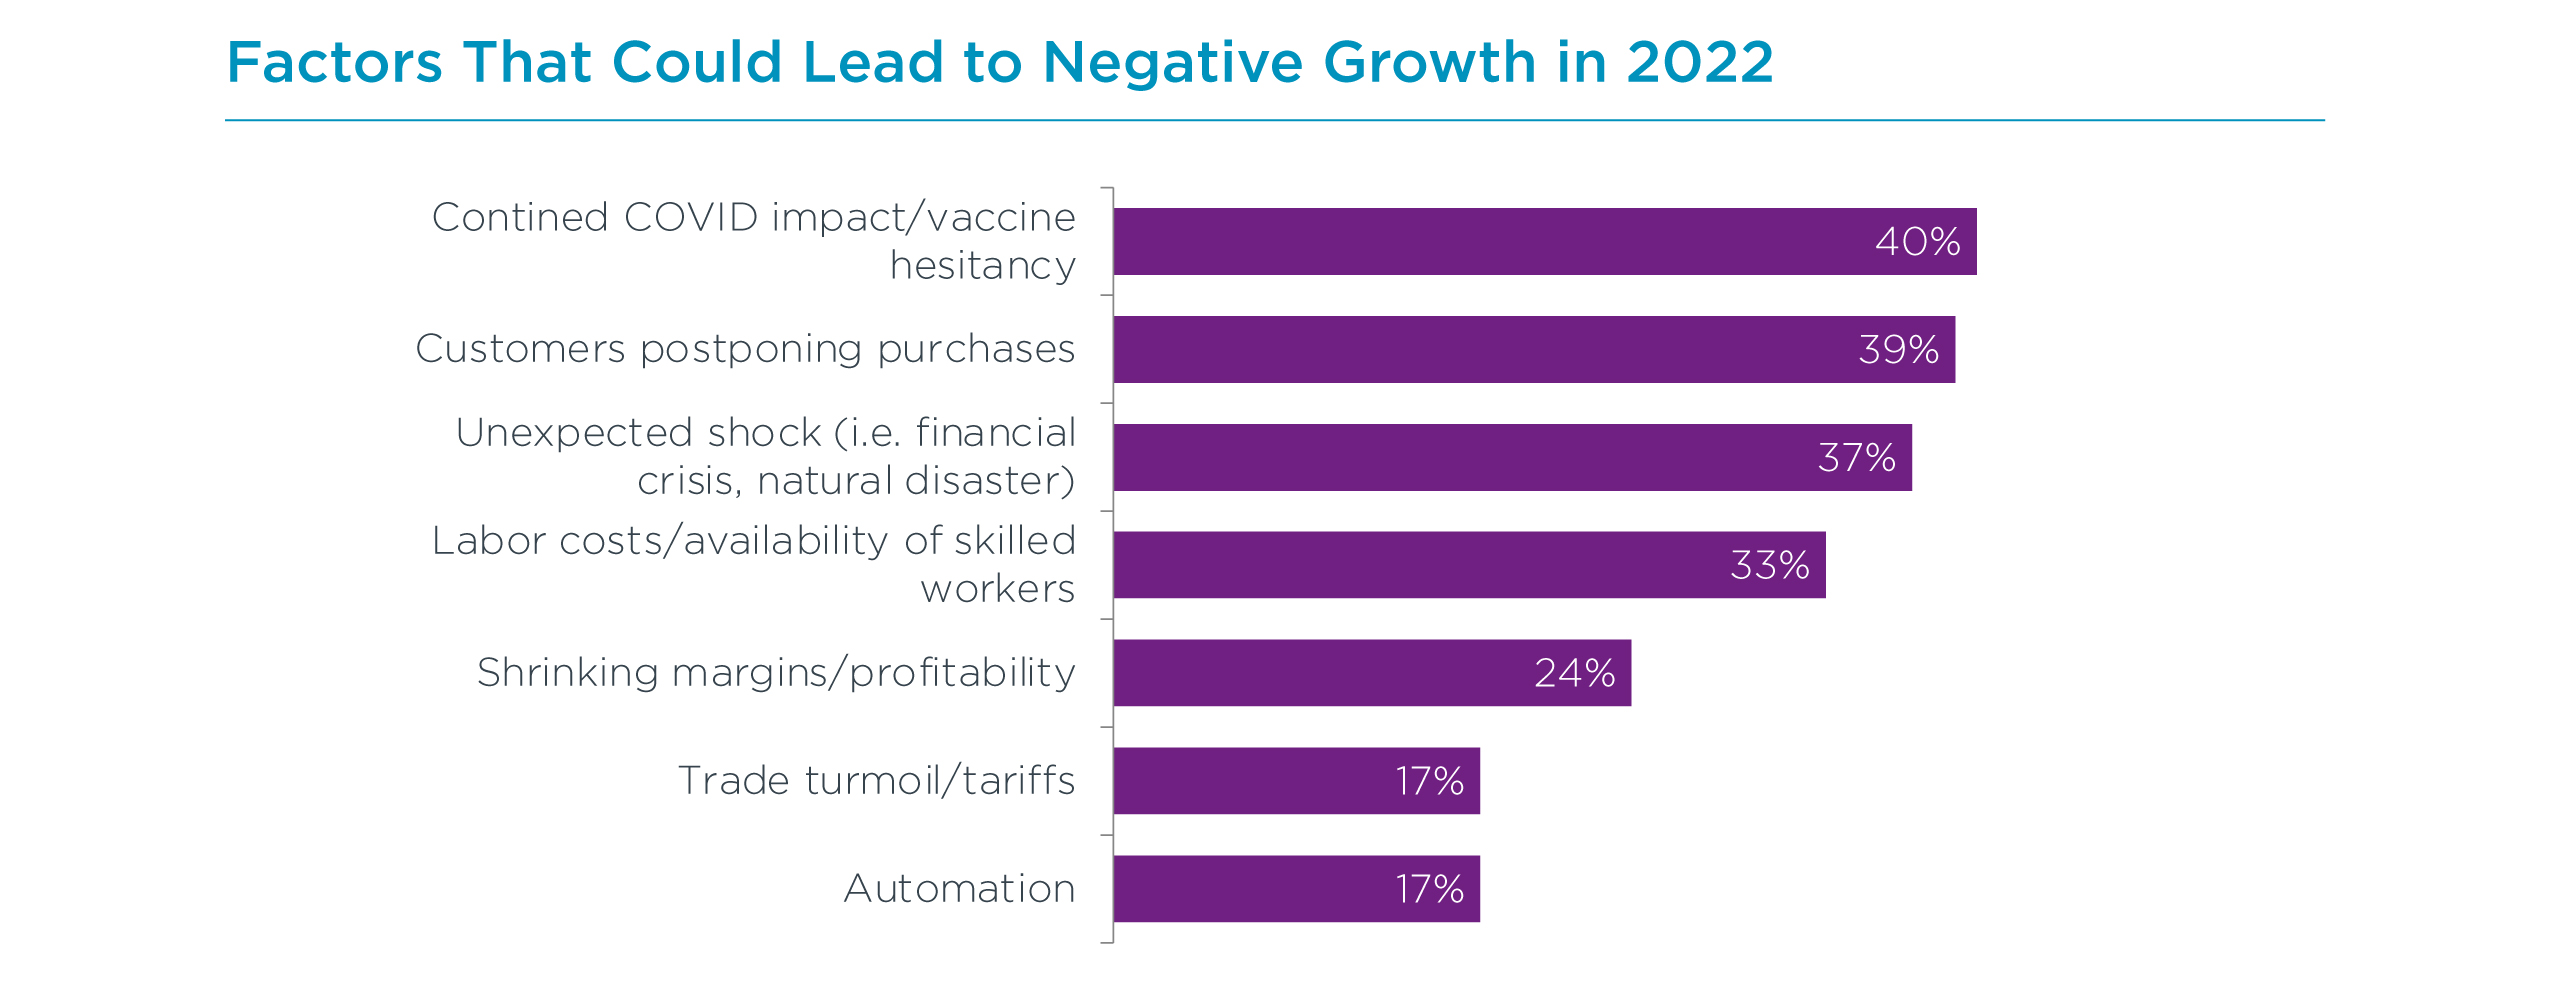 Factors That Could Lead to Negative Growth in 2022